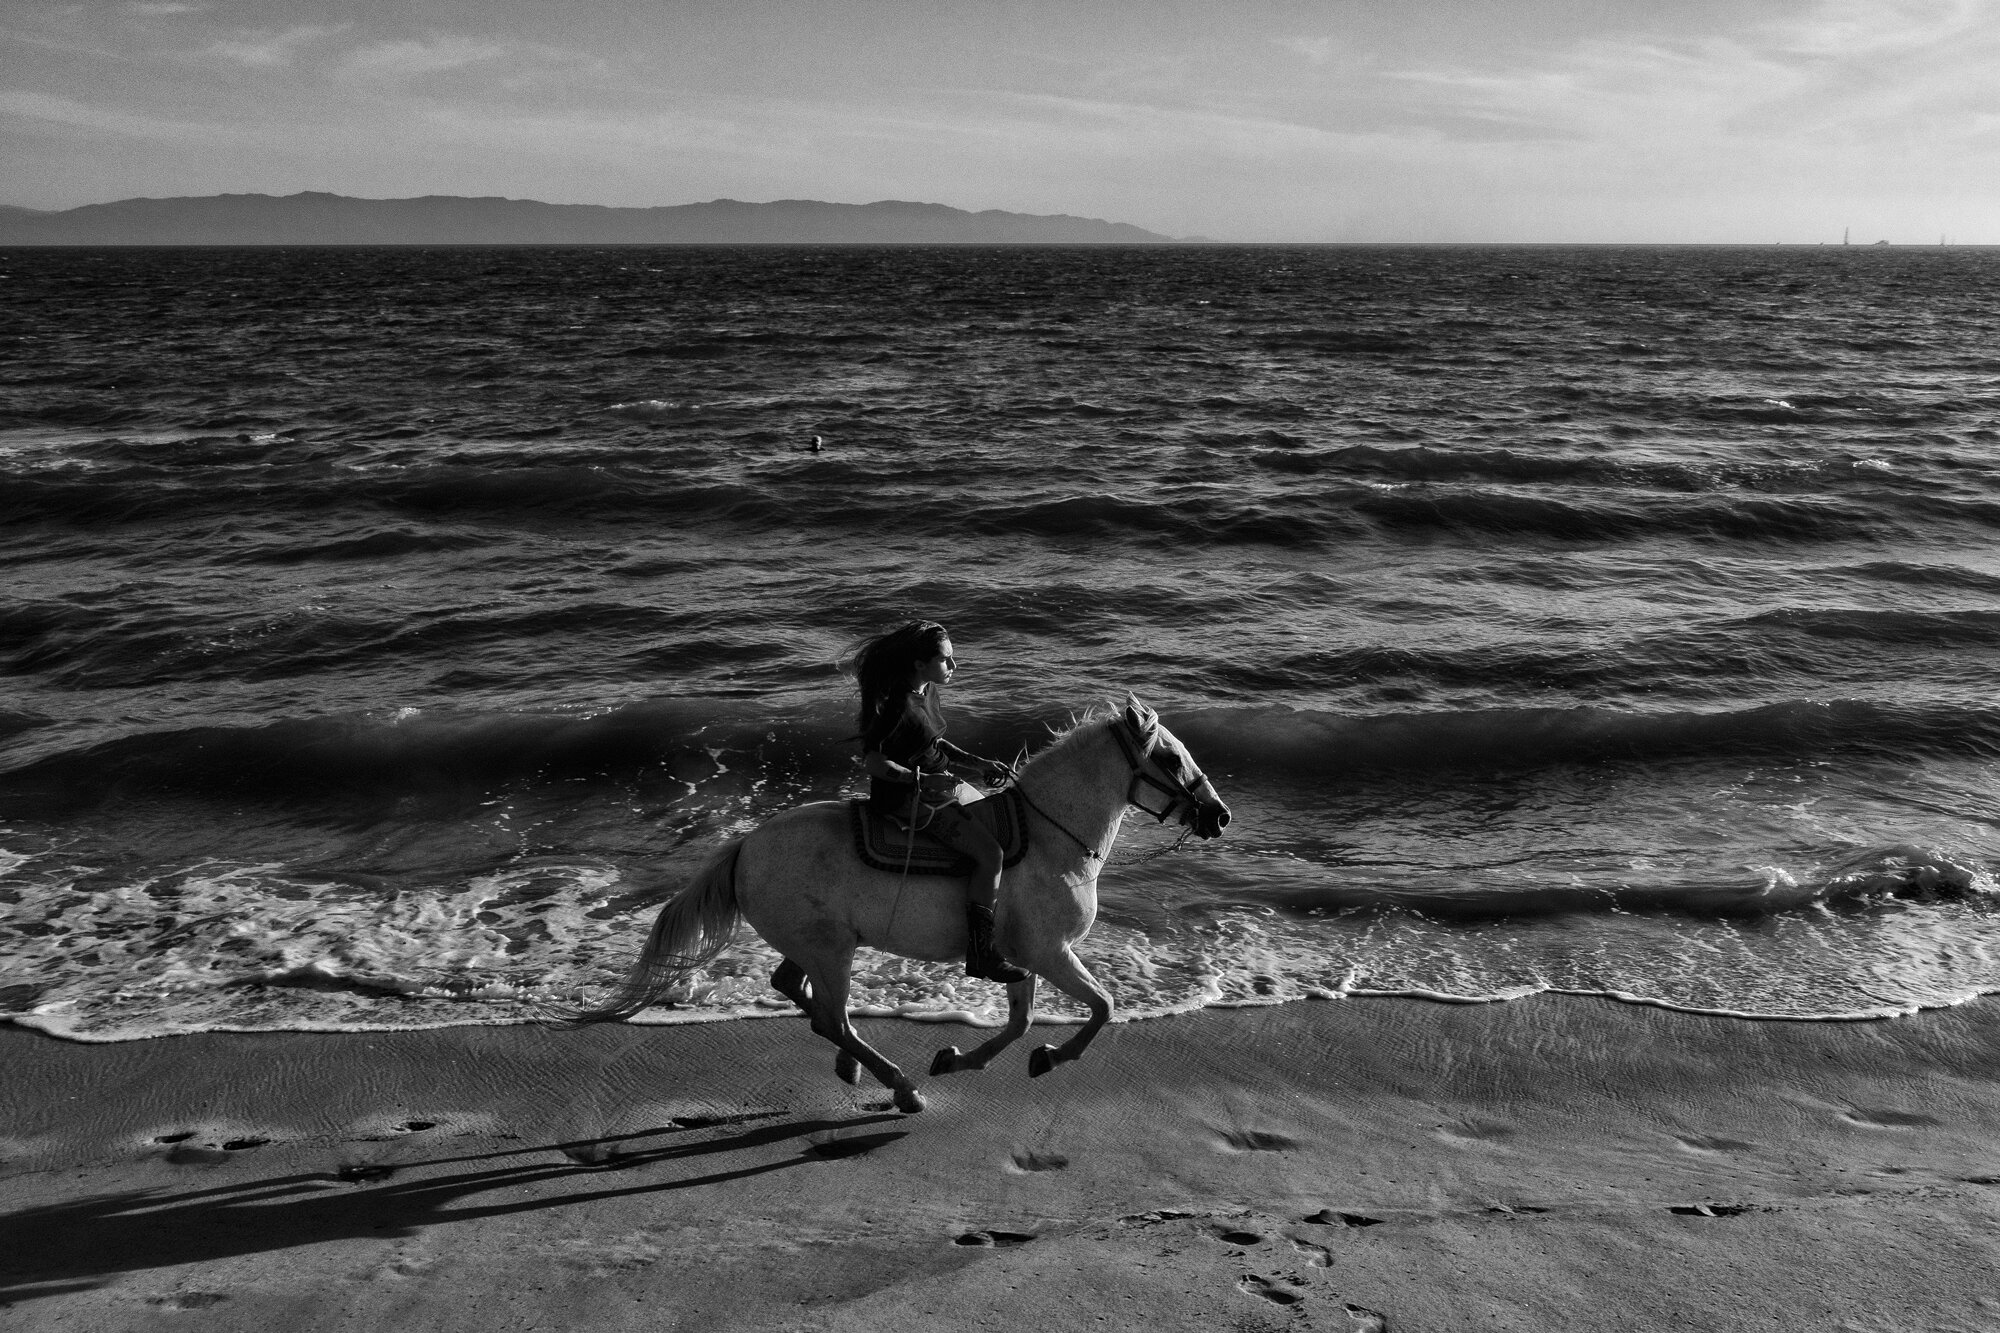  A woman rides a horse at Bucerias Beach. I walked to the beach to reflect, and to find others who go to the beach for peace and calm when she passed by me. The wind was against her so I couldn’t hear the steps of the horse. She appeared quickly and 